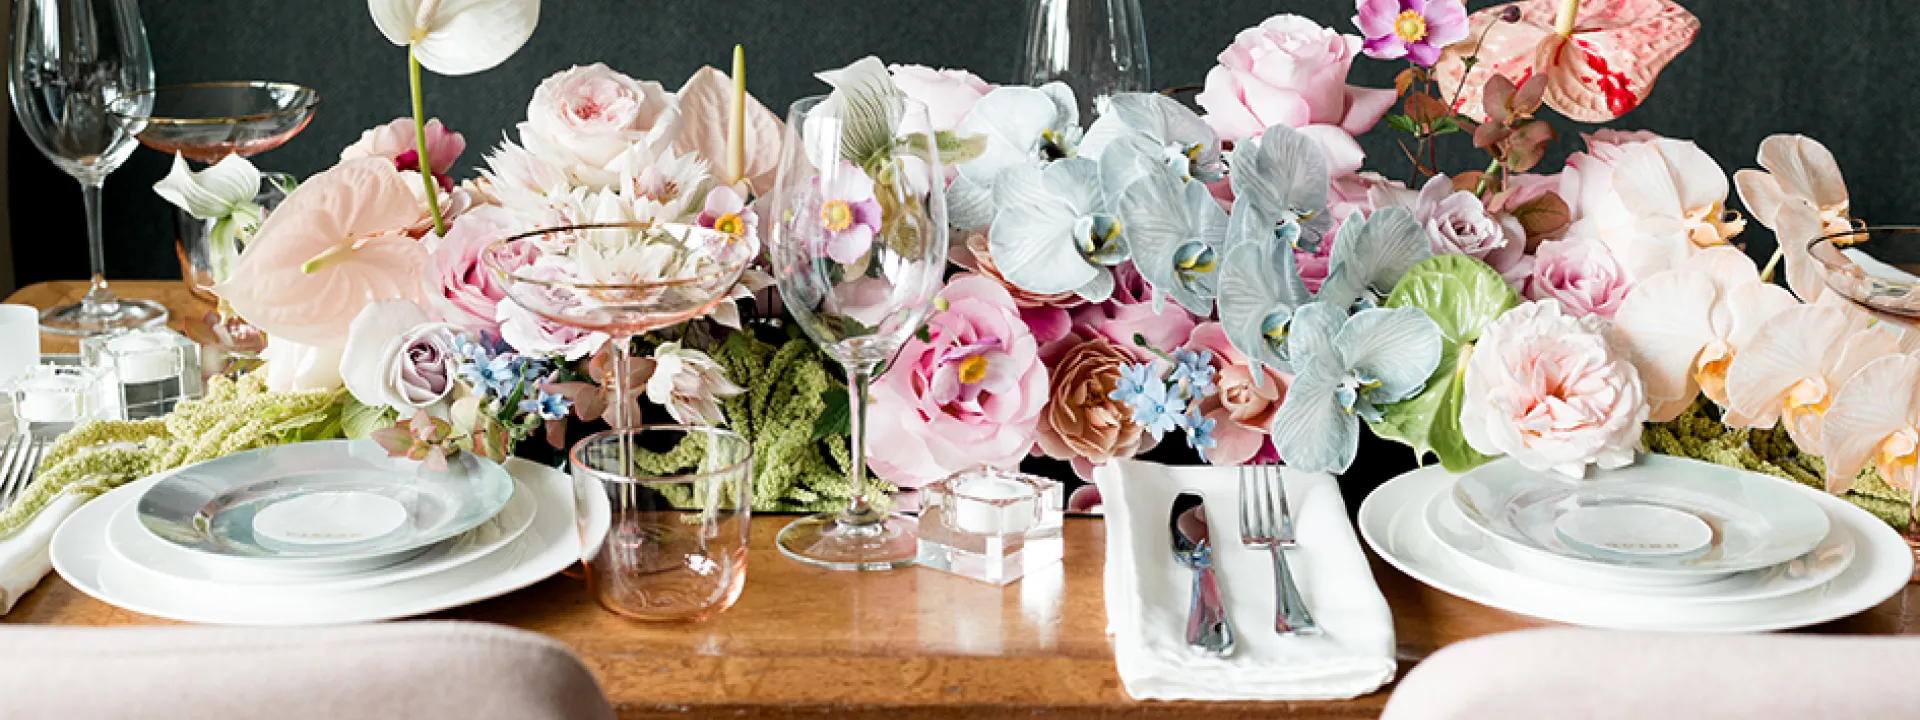 Wedding Floral Inspiration at Grand Cafe in Minneapolis